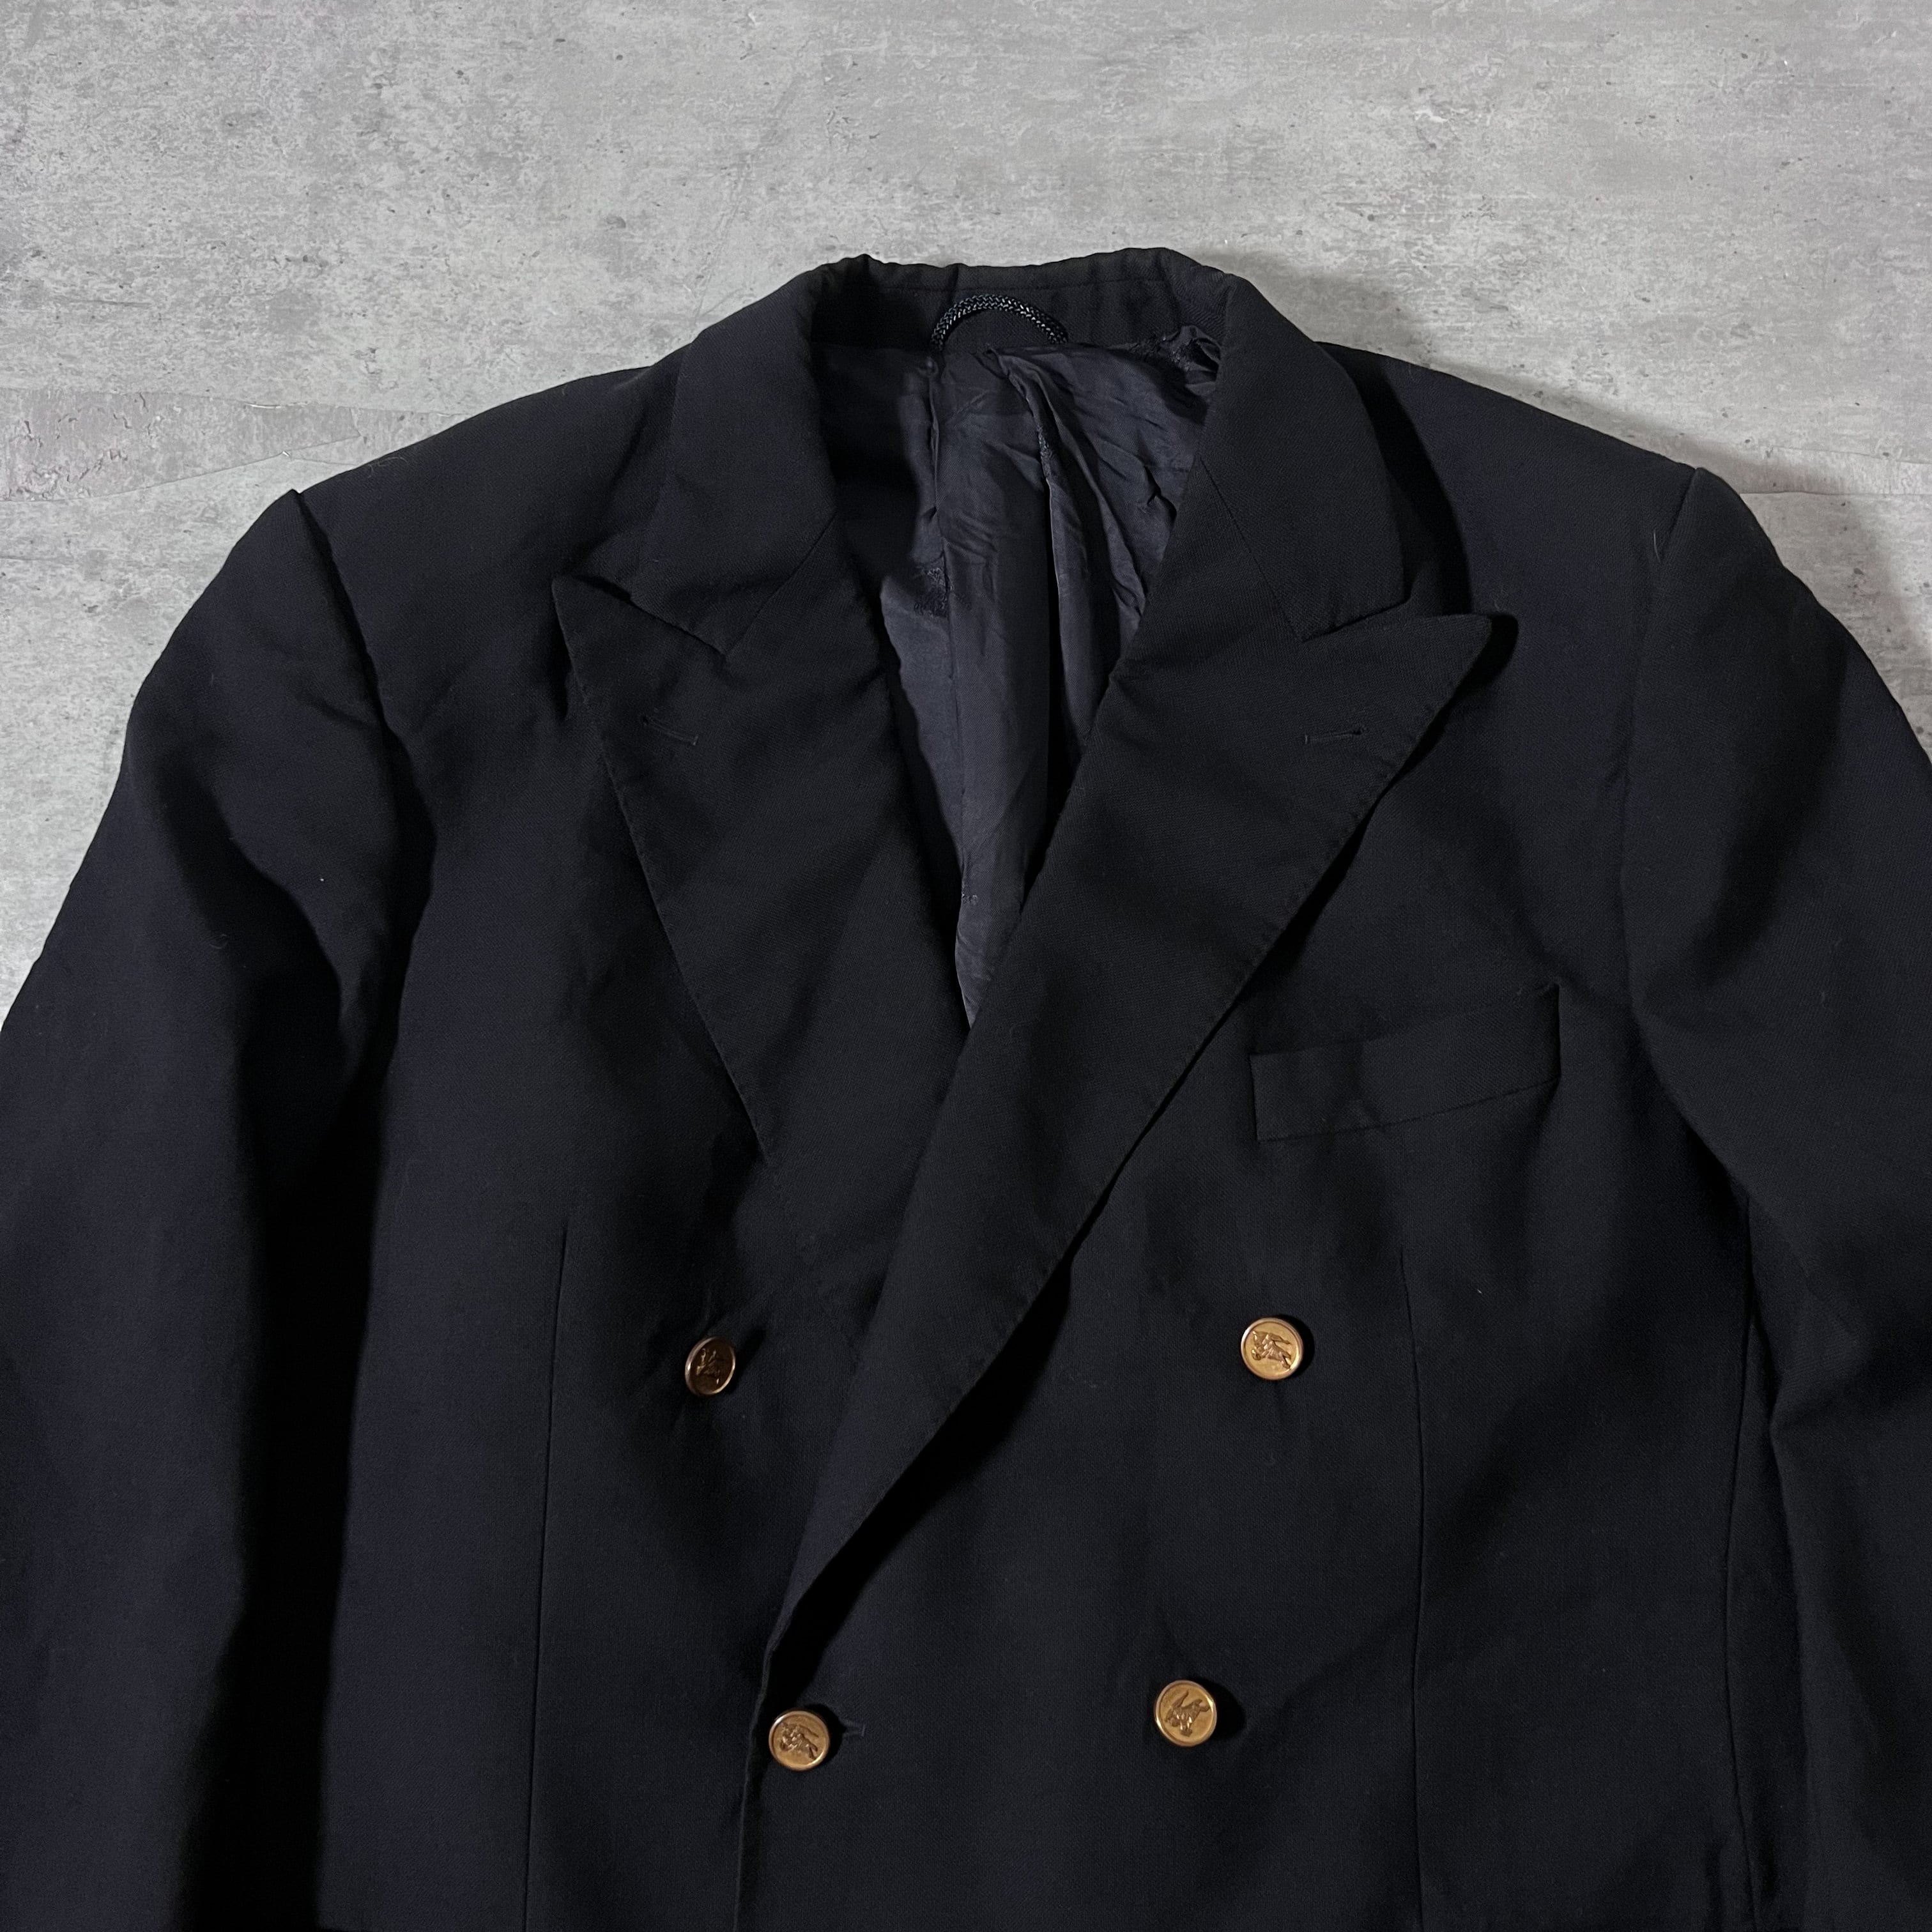 80s-90s “BURBERRYS” wool double tailored jacket made in Germany 80